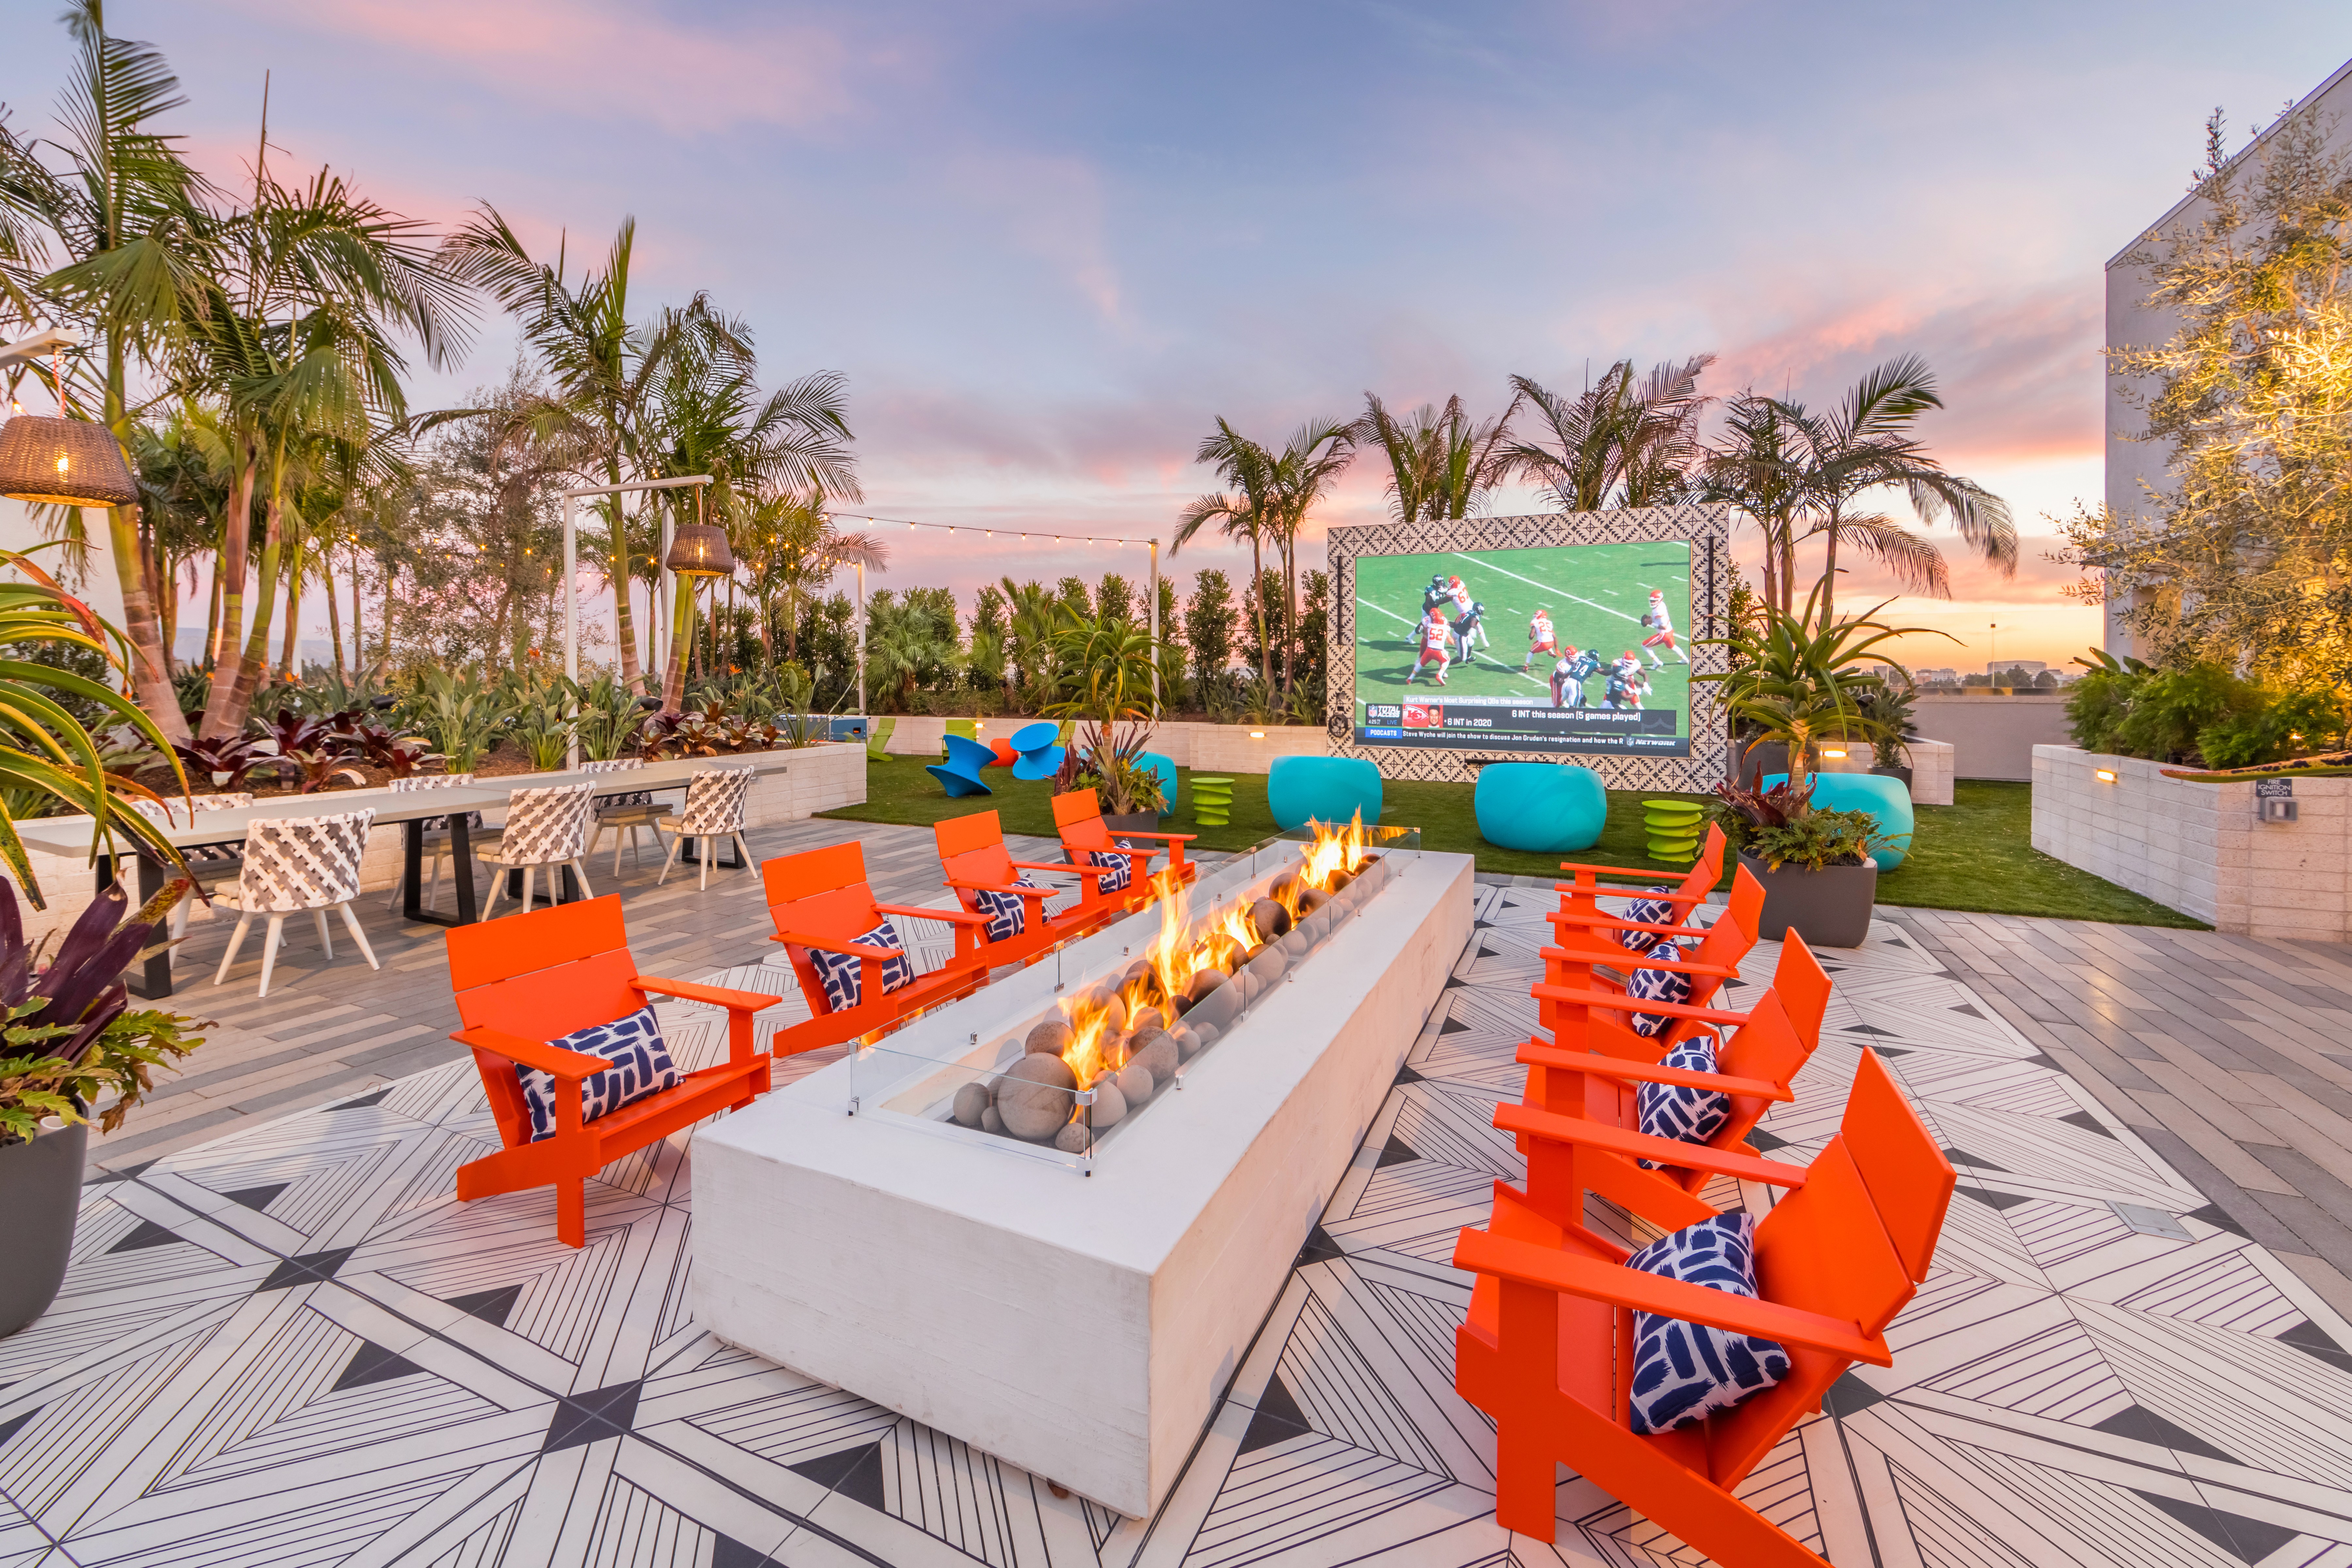 8 Adirondack chairs seated around a long concrete fire table at dusk with palm trees and a large outdoor movie screen in the background